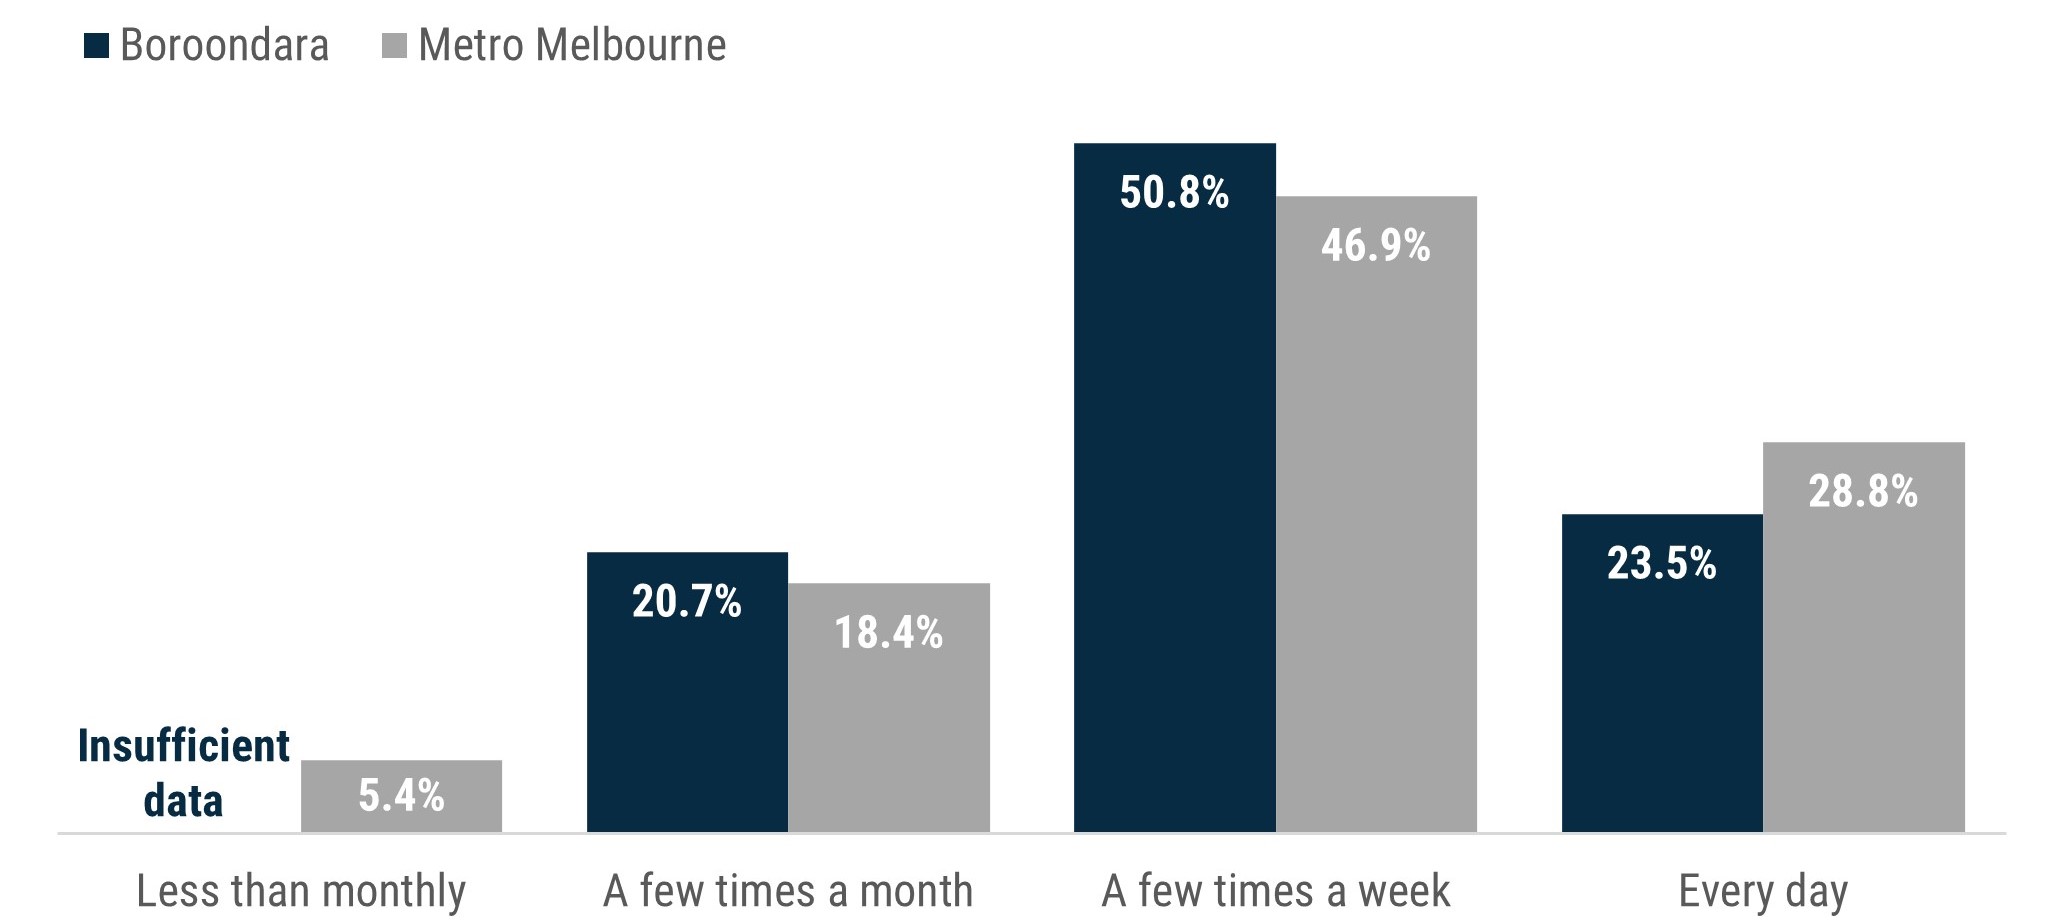 Column chart which shows that 24% of Boroondara residents speak to family every day, 51% do so a few times a week and more than 20% do so less often. By contrast, in metropolitan Melbourne 29% of residents speak to family at least once a day, 47% do so a few times a week, and 24% do so less often. 